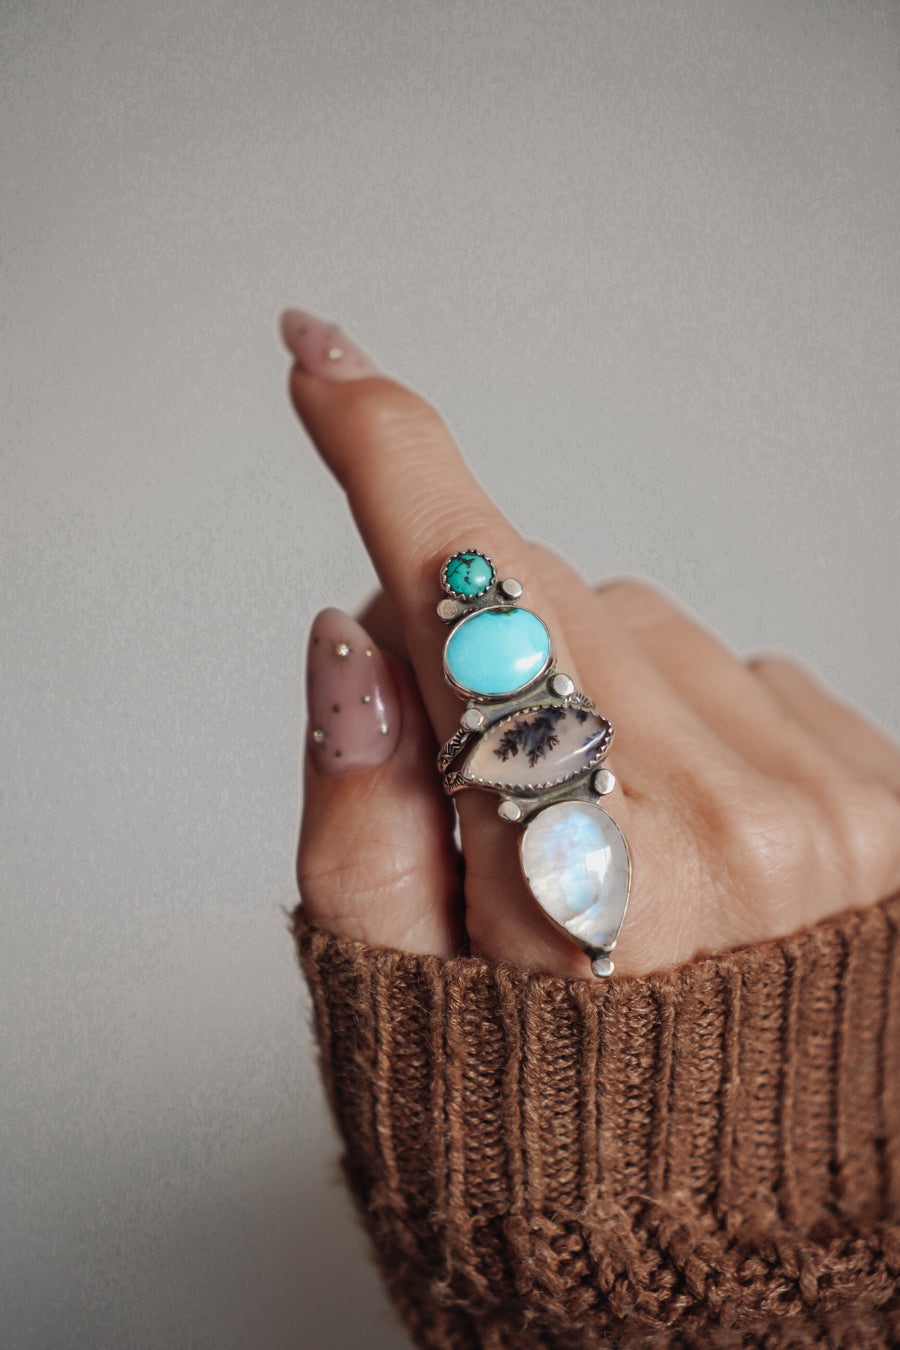 Cairn Ring in Rainbow Moonstone, Scenic Agate & Hubei + Sonoran Mtn Turquoise (Size 9.25)